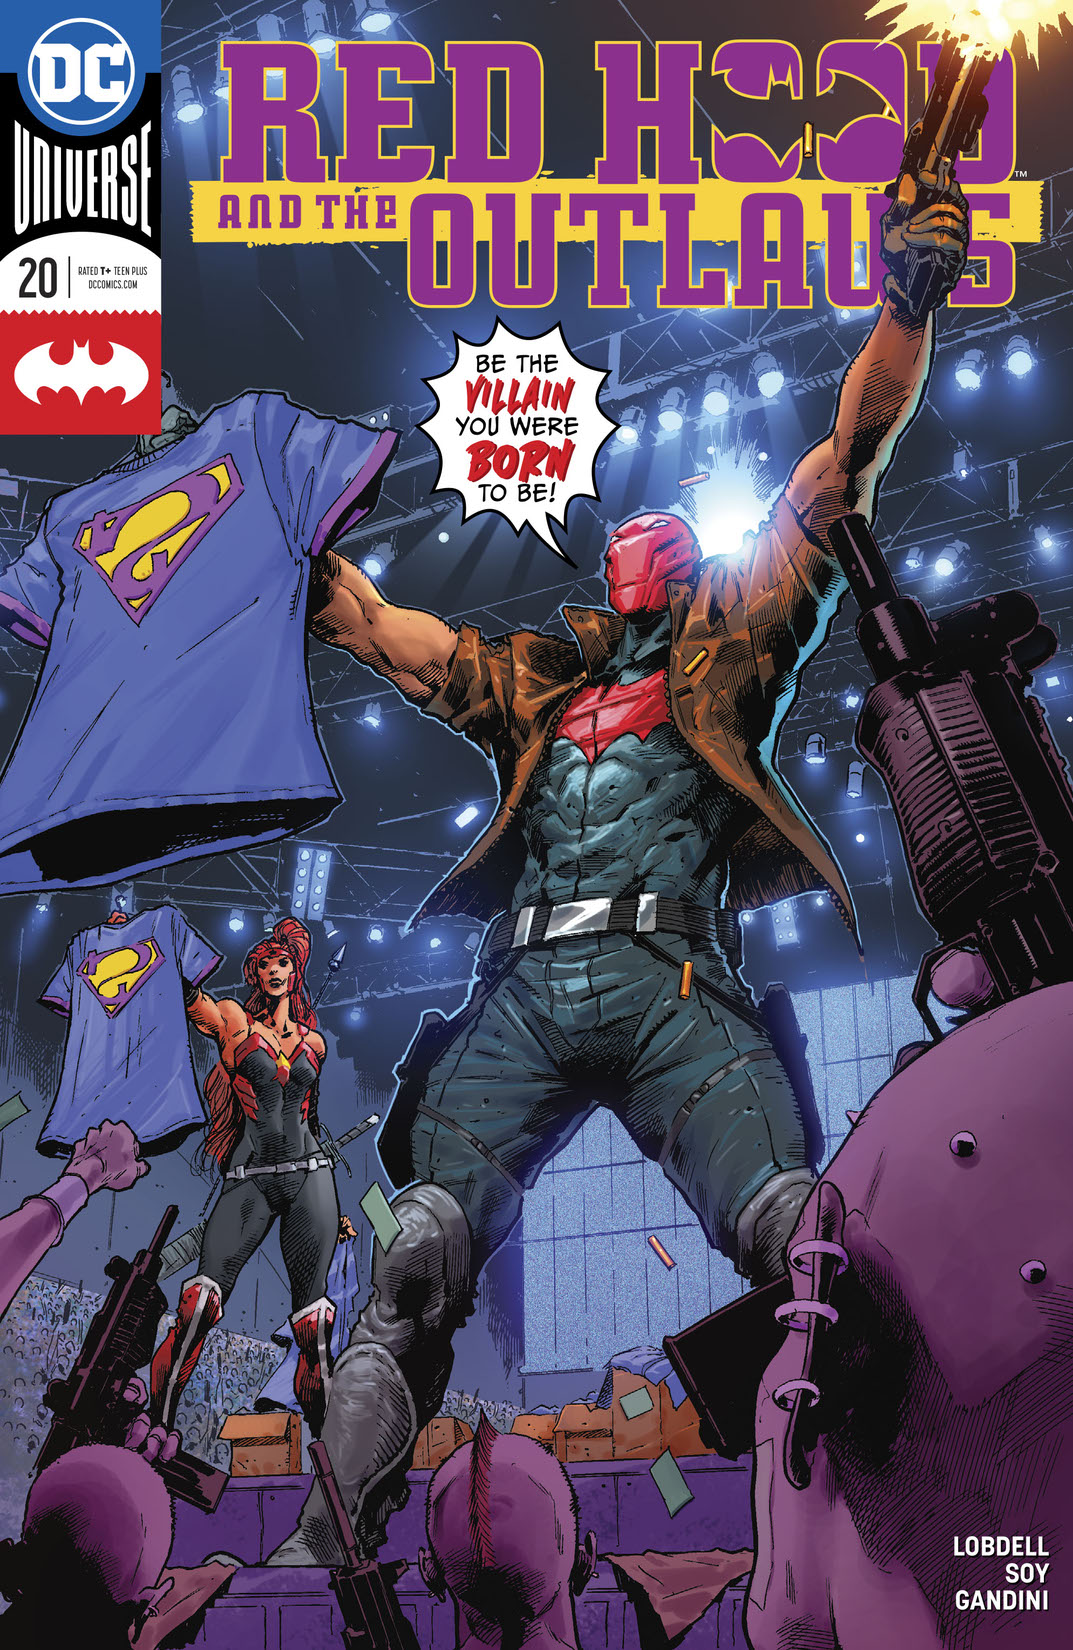 Red Hood and the Outlaws (2016-) #20 preview images